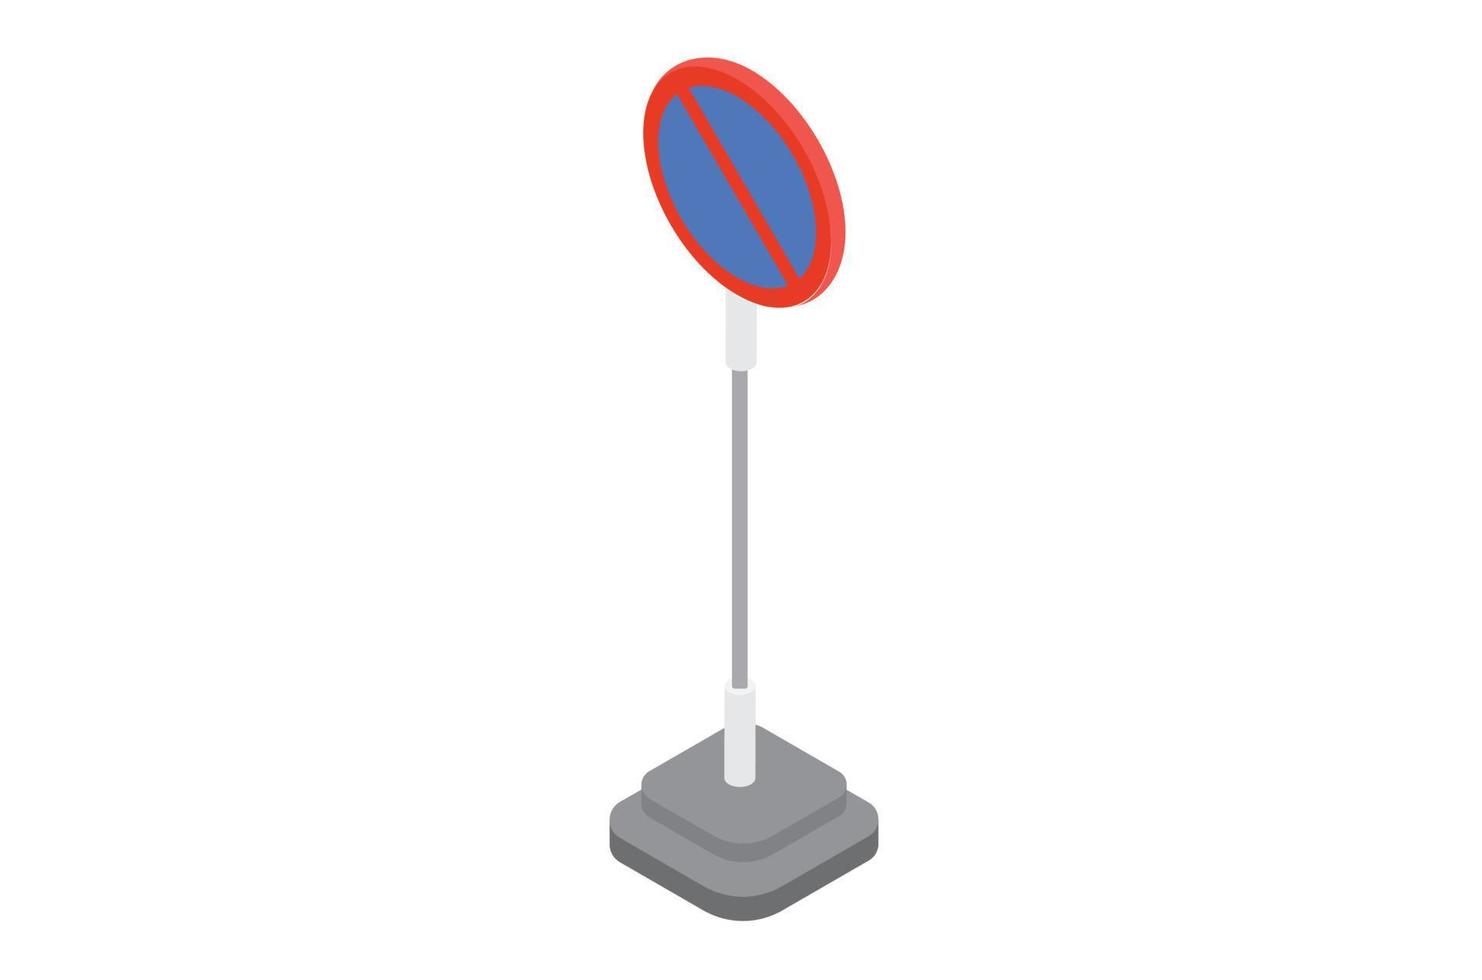 llustration of No Waiting sign on white background, vector 3d isometric Suitable for Diagrams, Infographics, And Other Graphic Related Assets